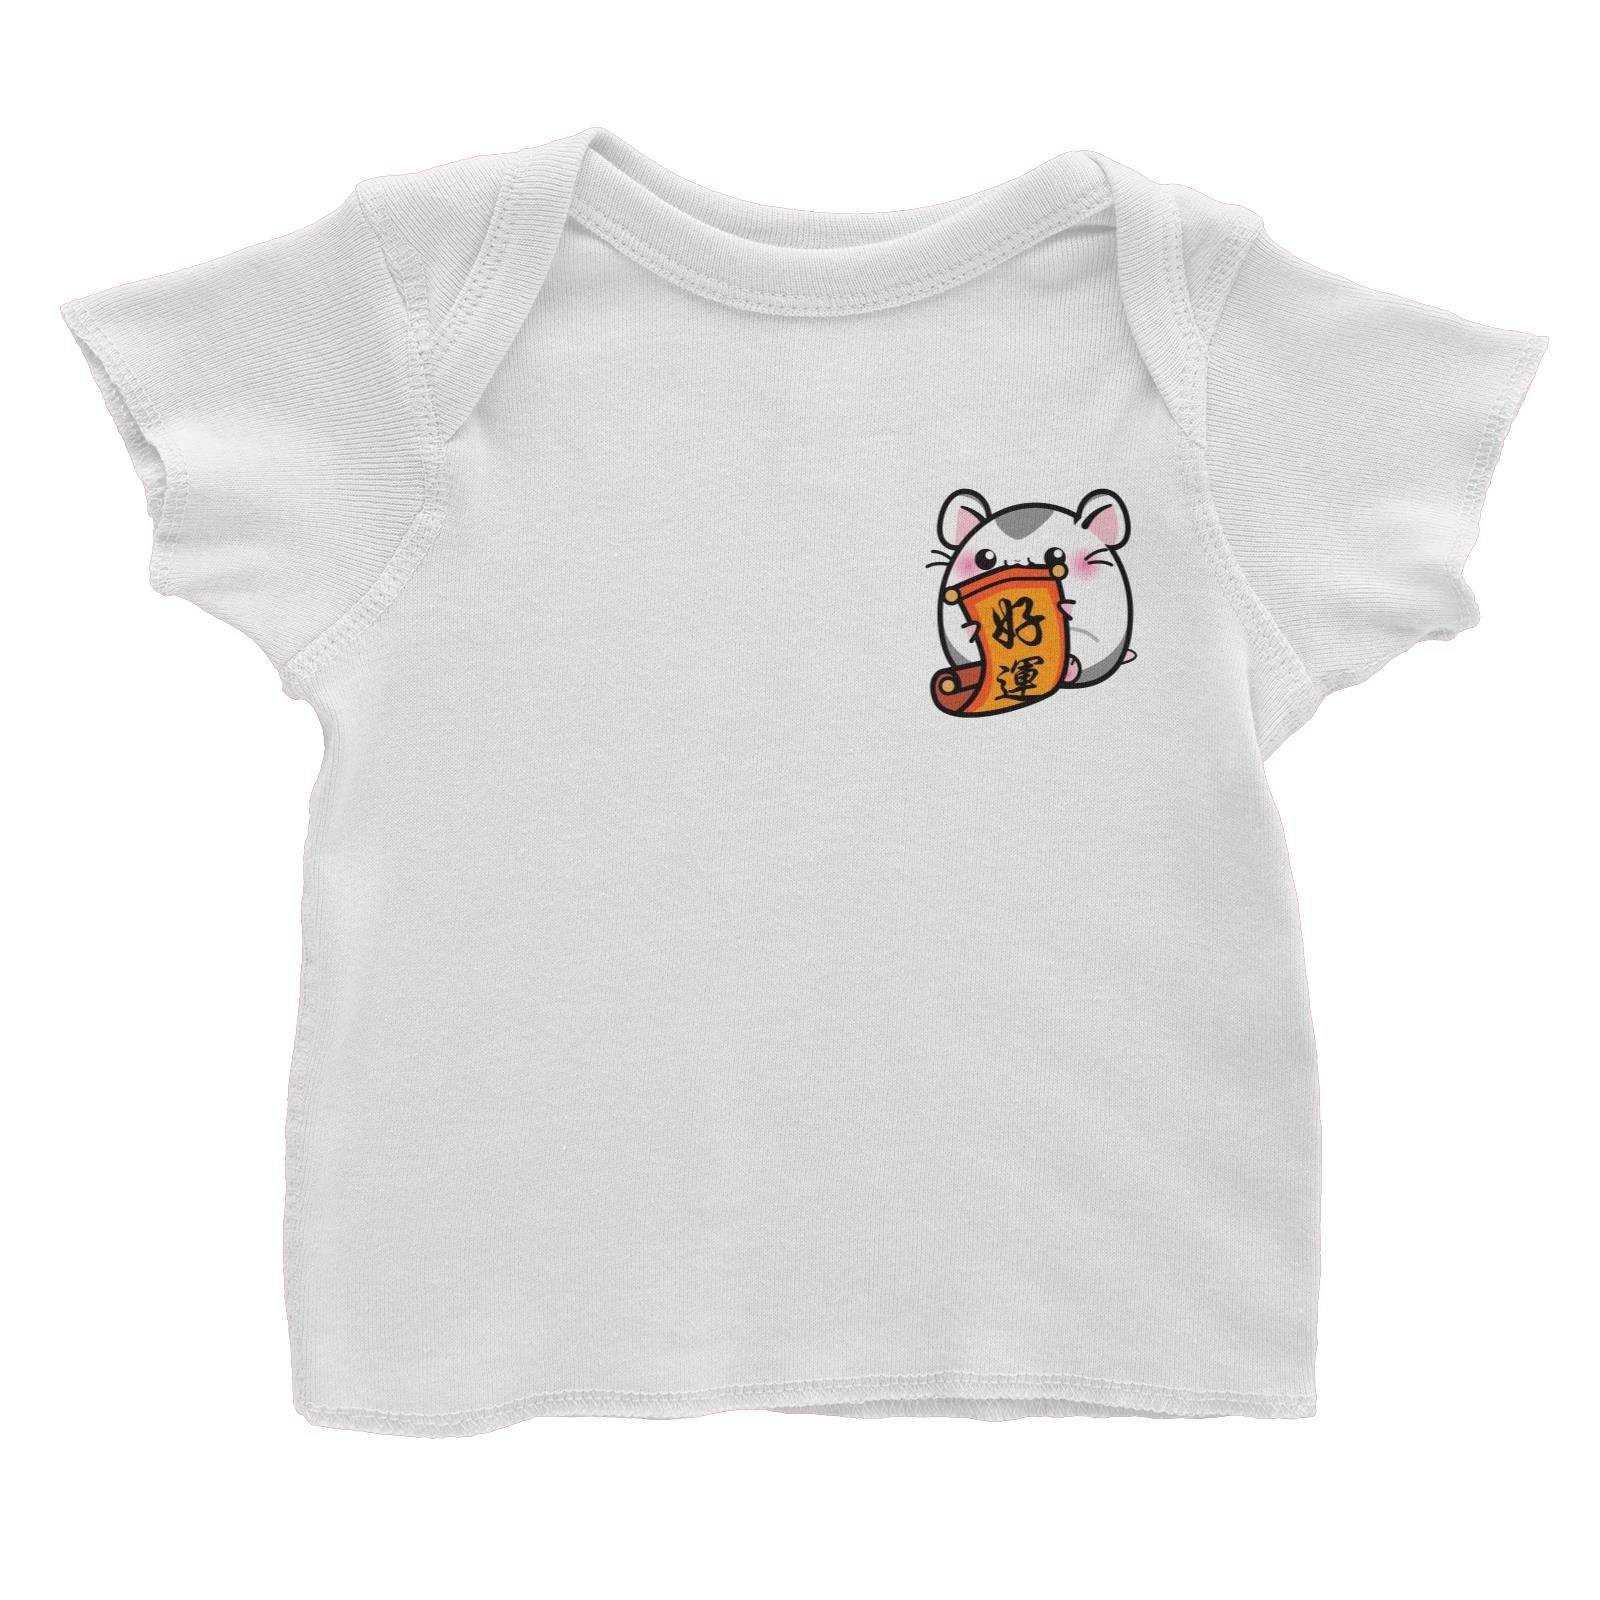 Prosperous Pocket Mouse Series Lucky Jim Fortune Comes to You Baby T-Shirt